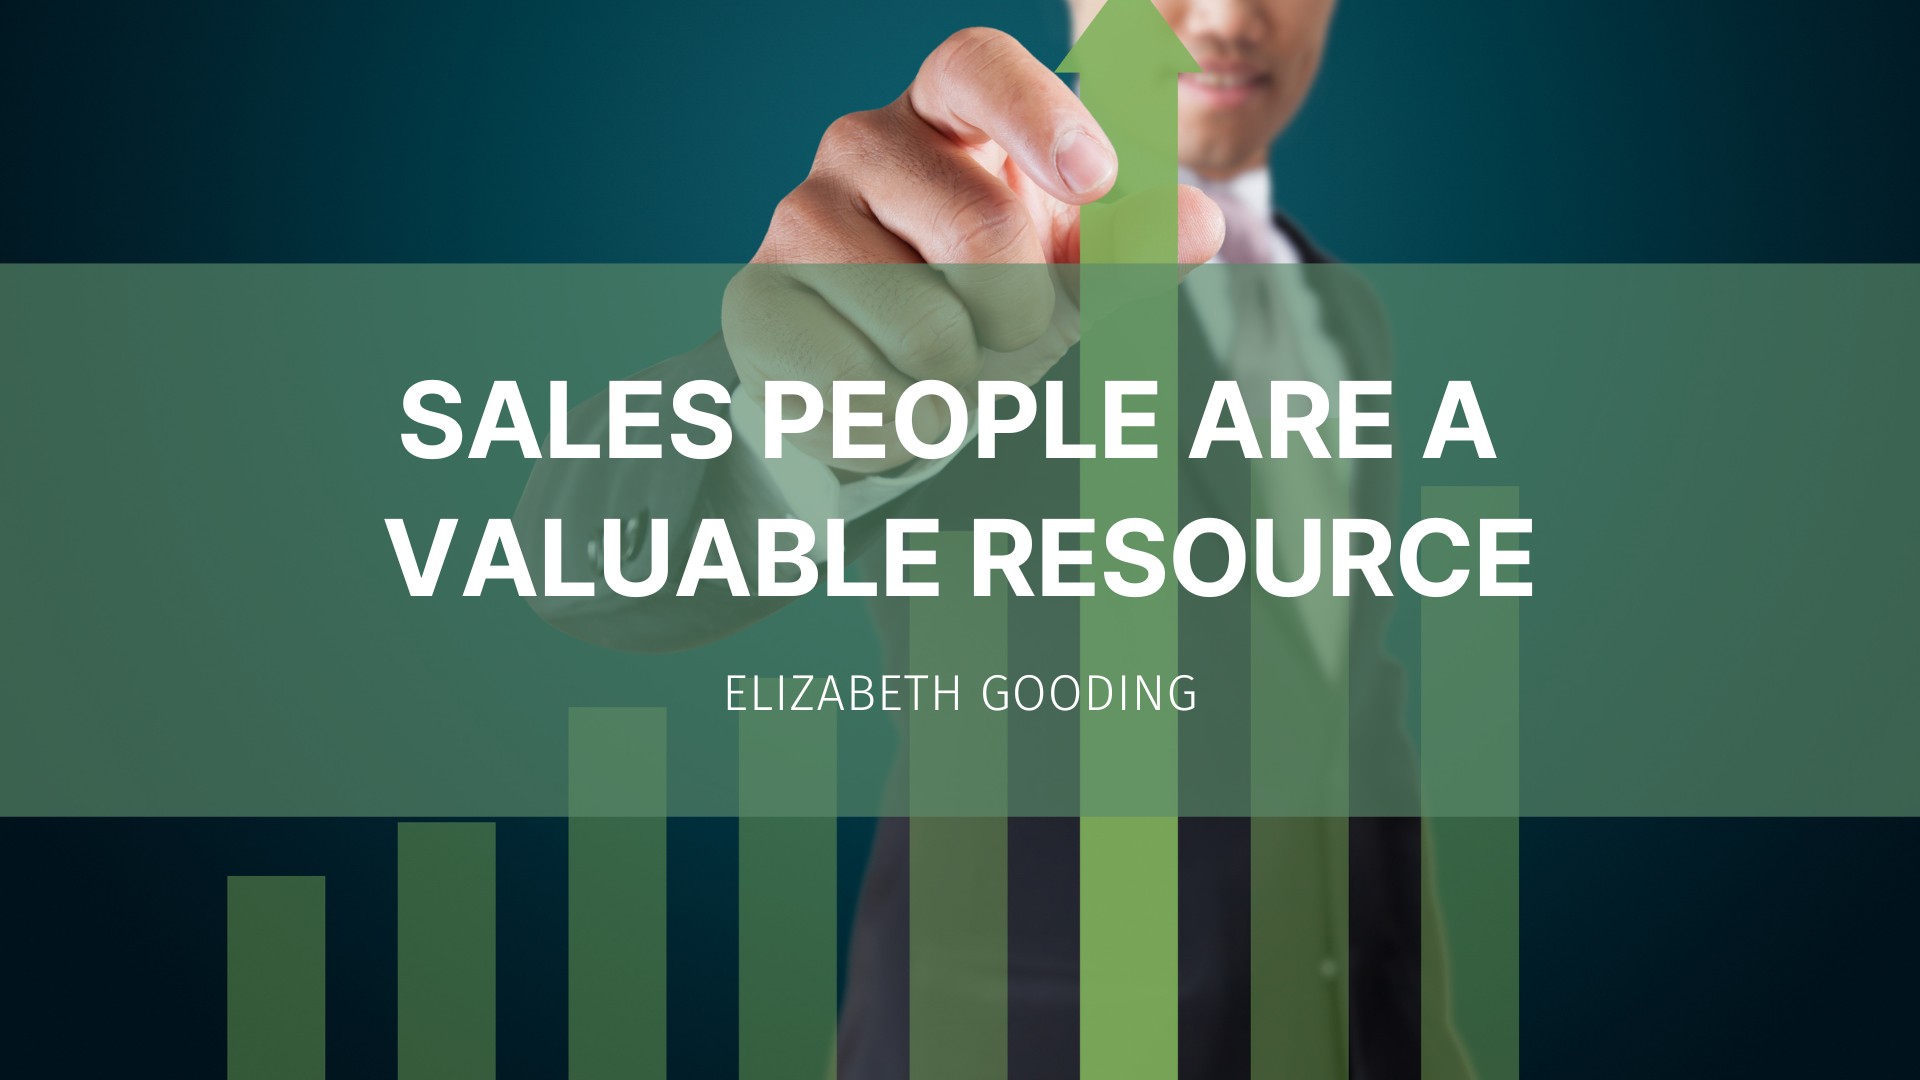 Featured image for “Sales people are a valuable resource”